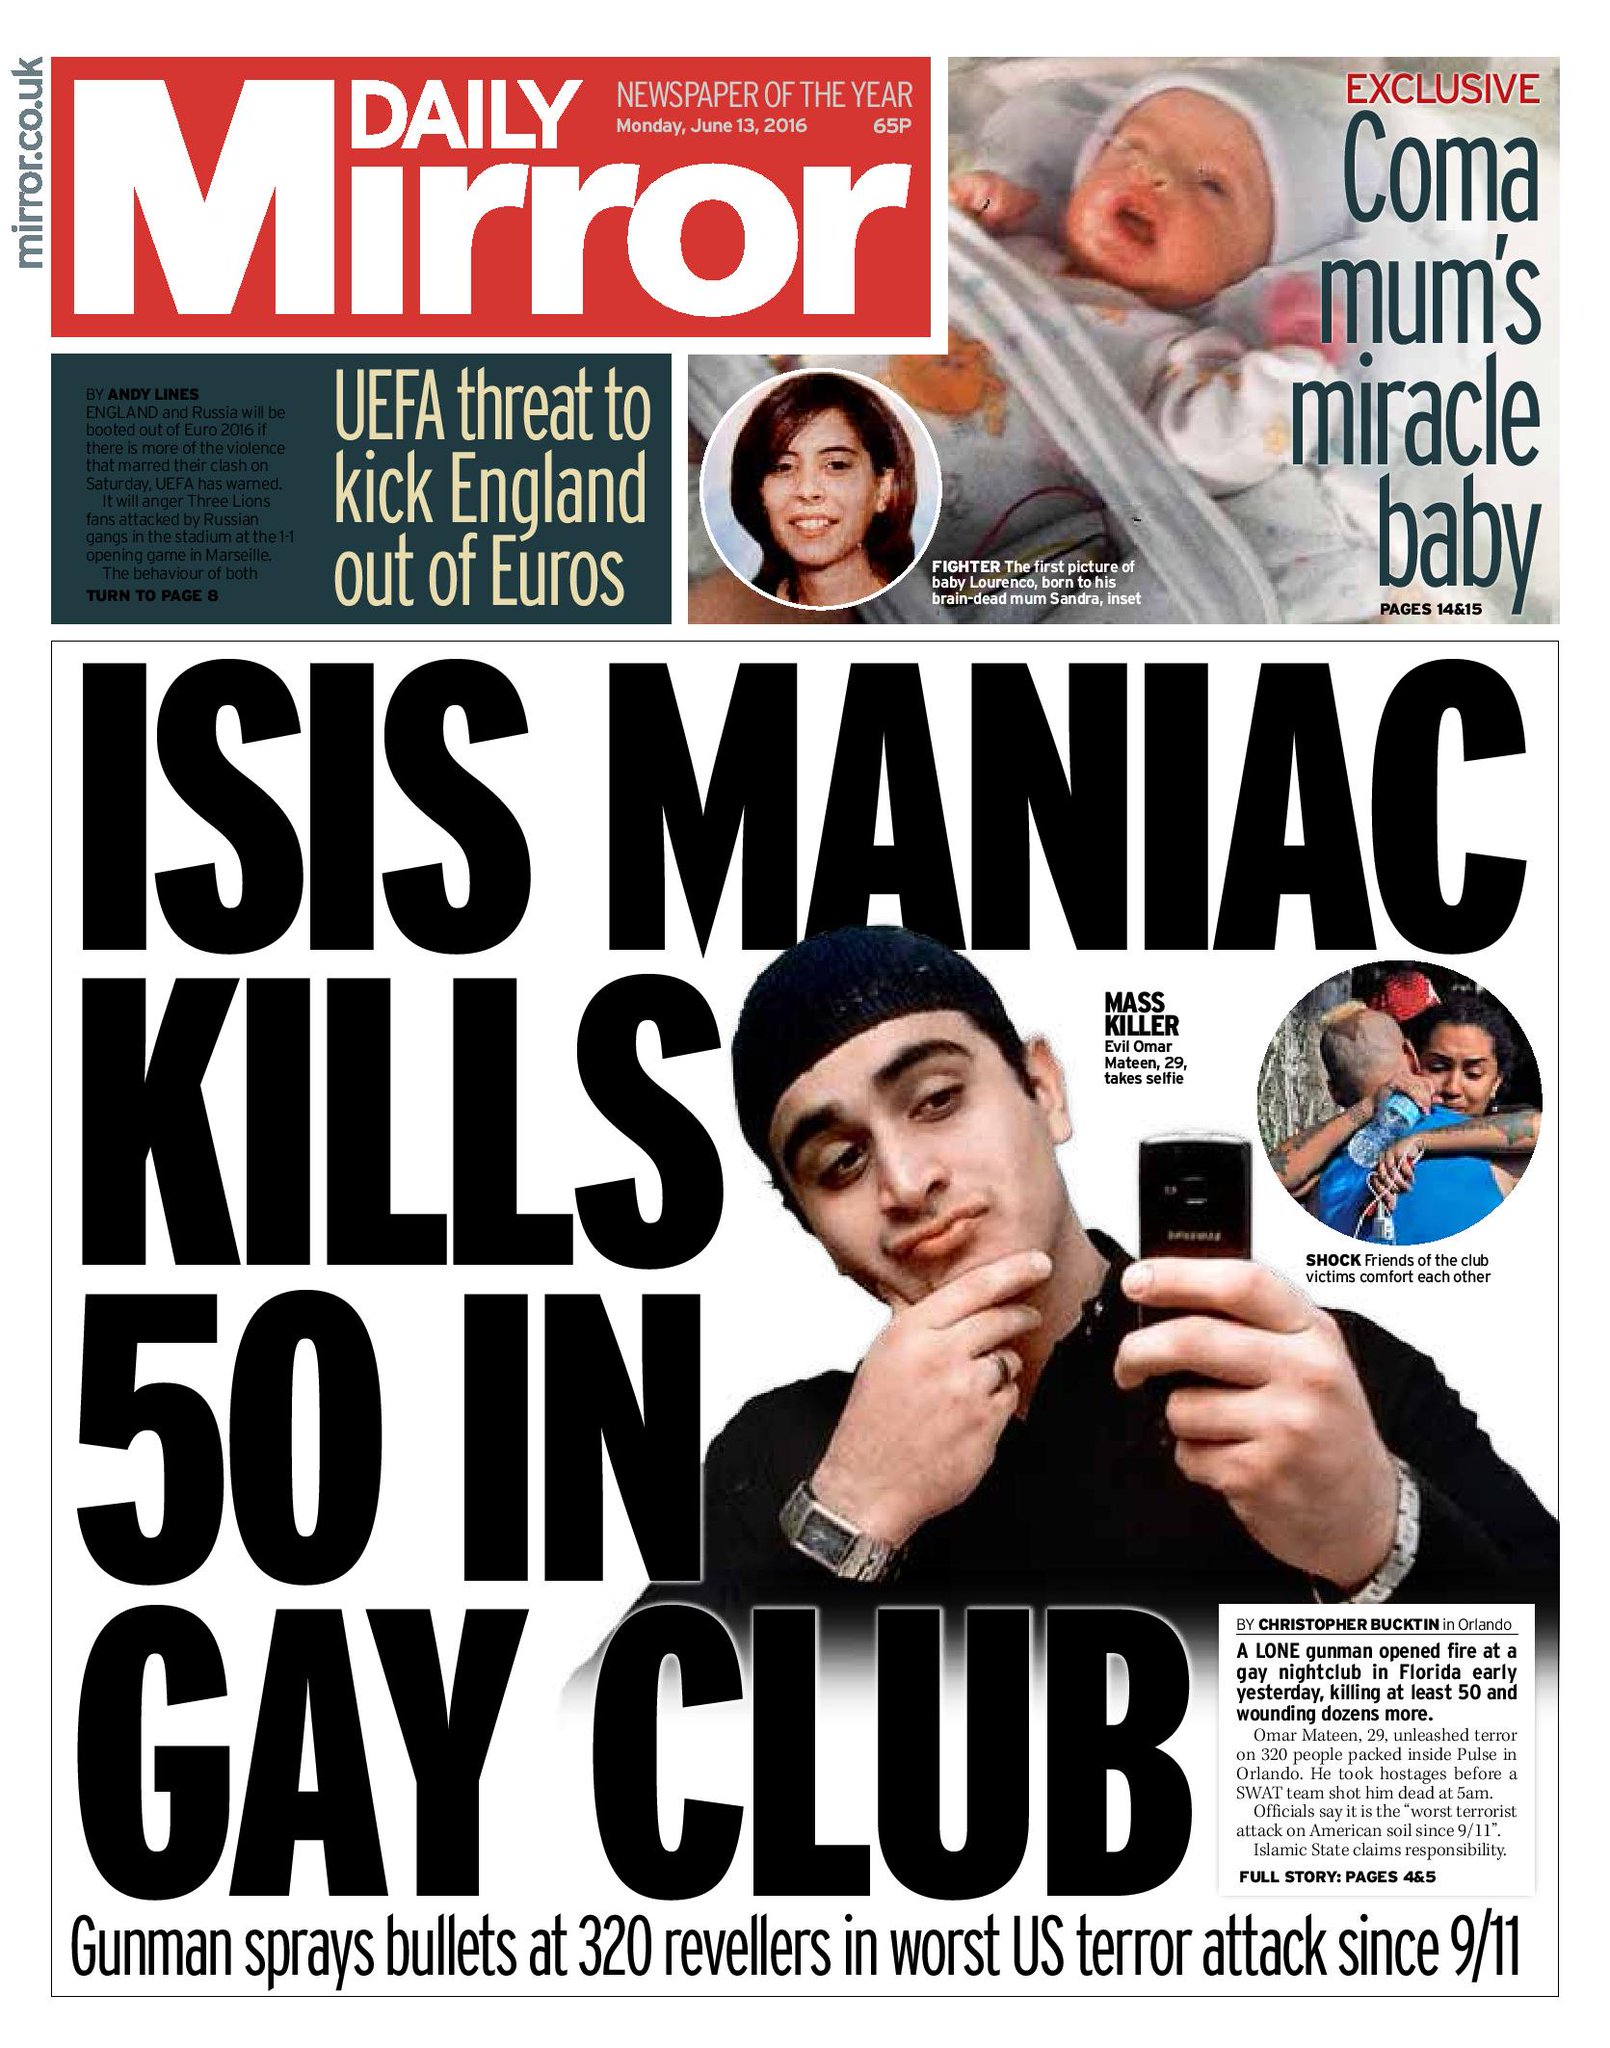 Daily Mirror On Twitter Tomorrows Daily Mirror Front Page Isis 